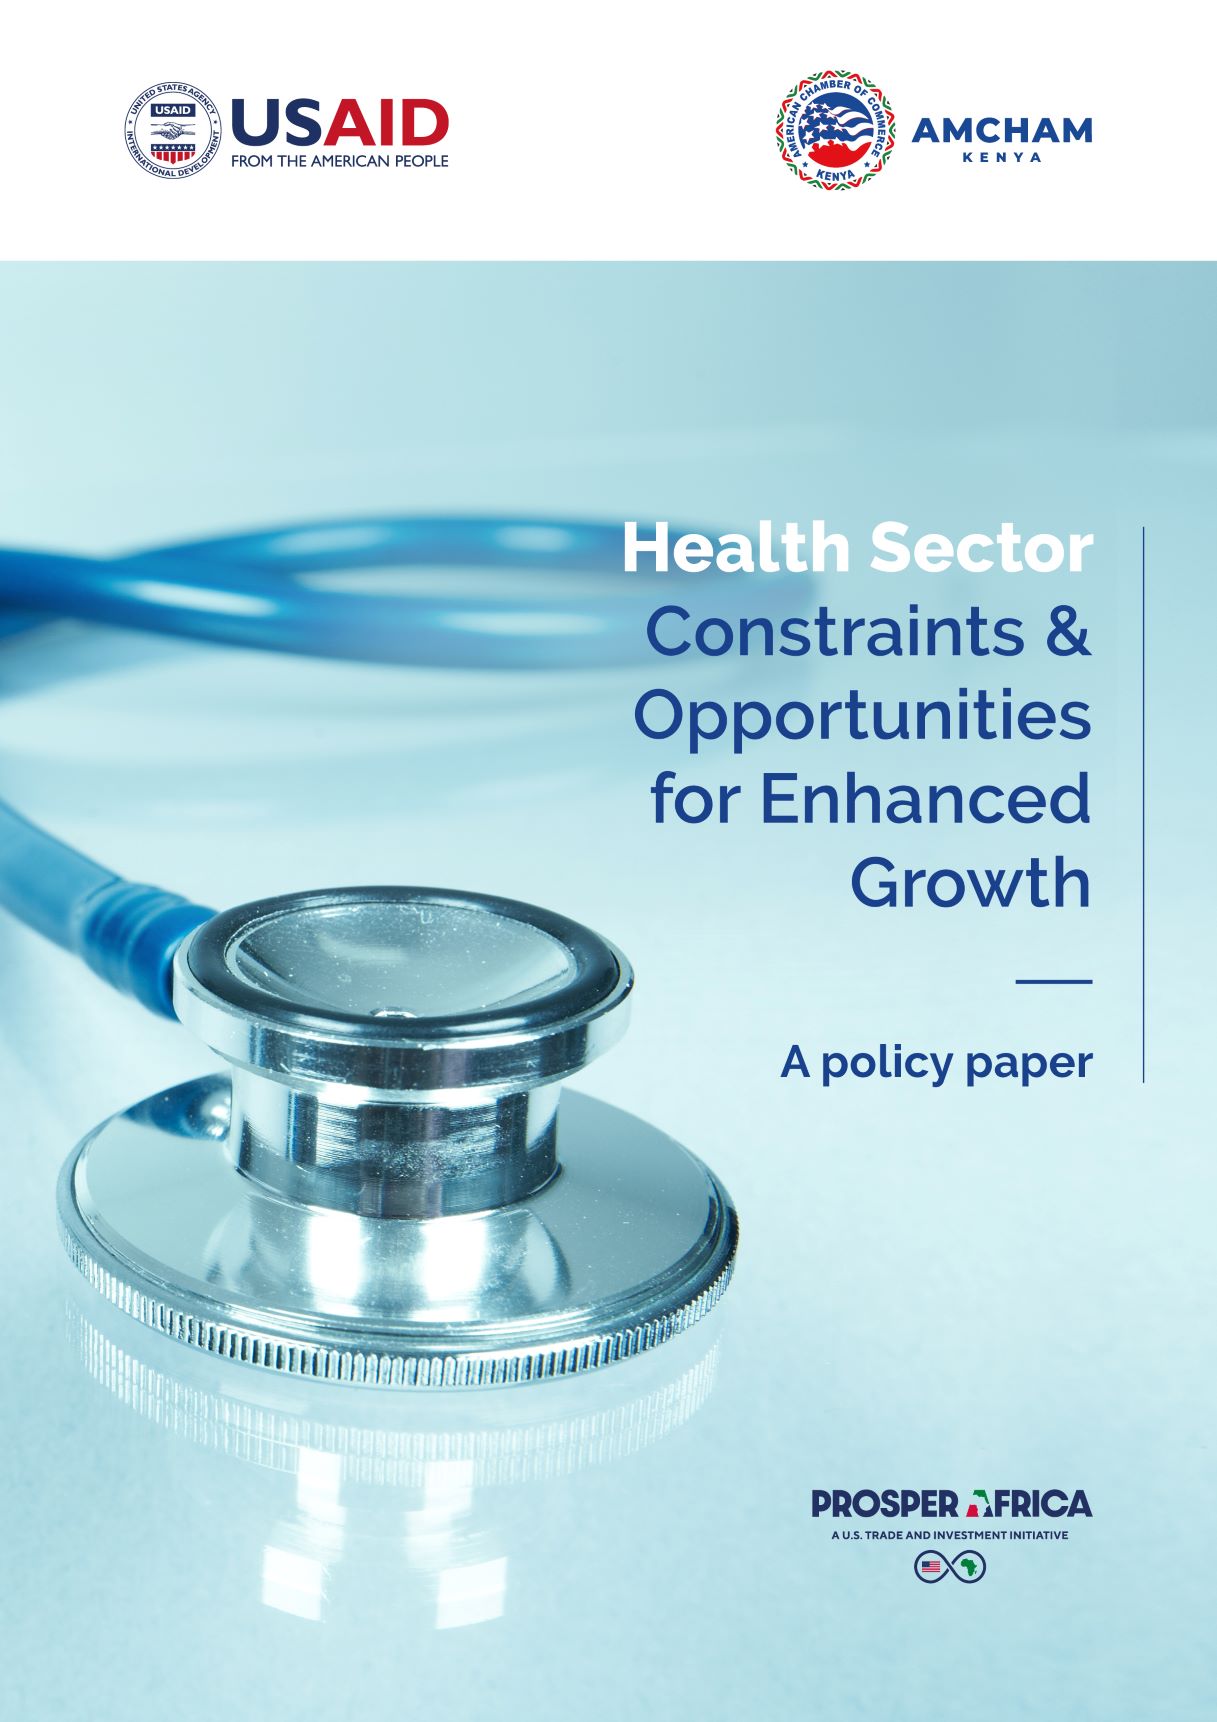 Health Policy Paper